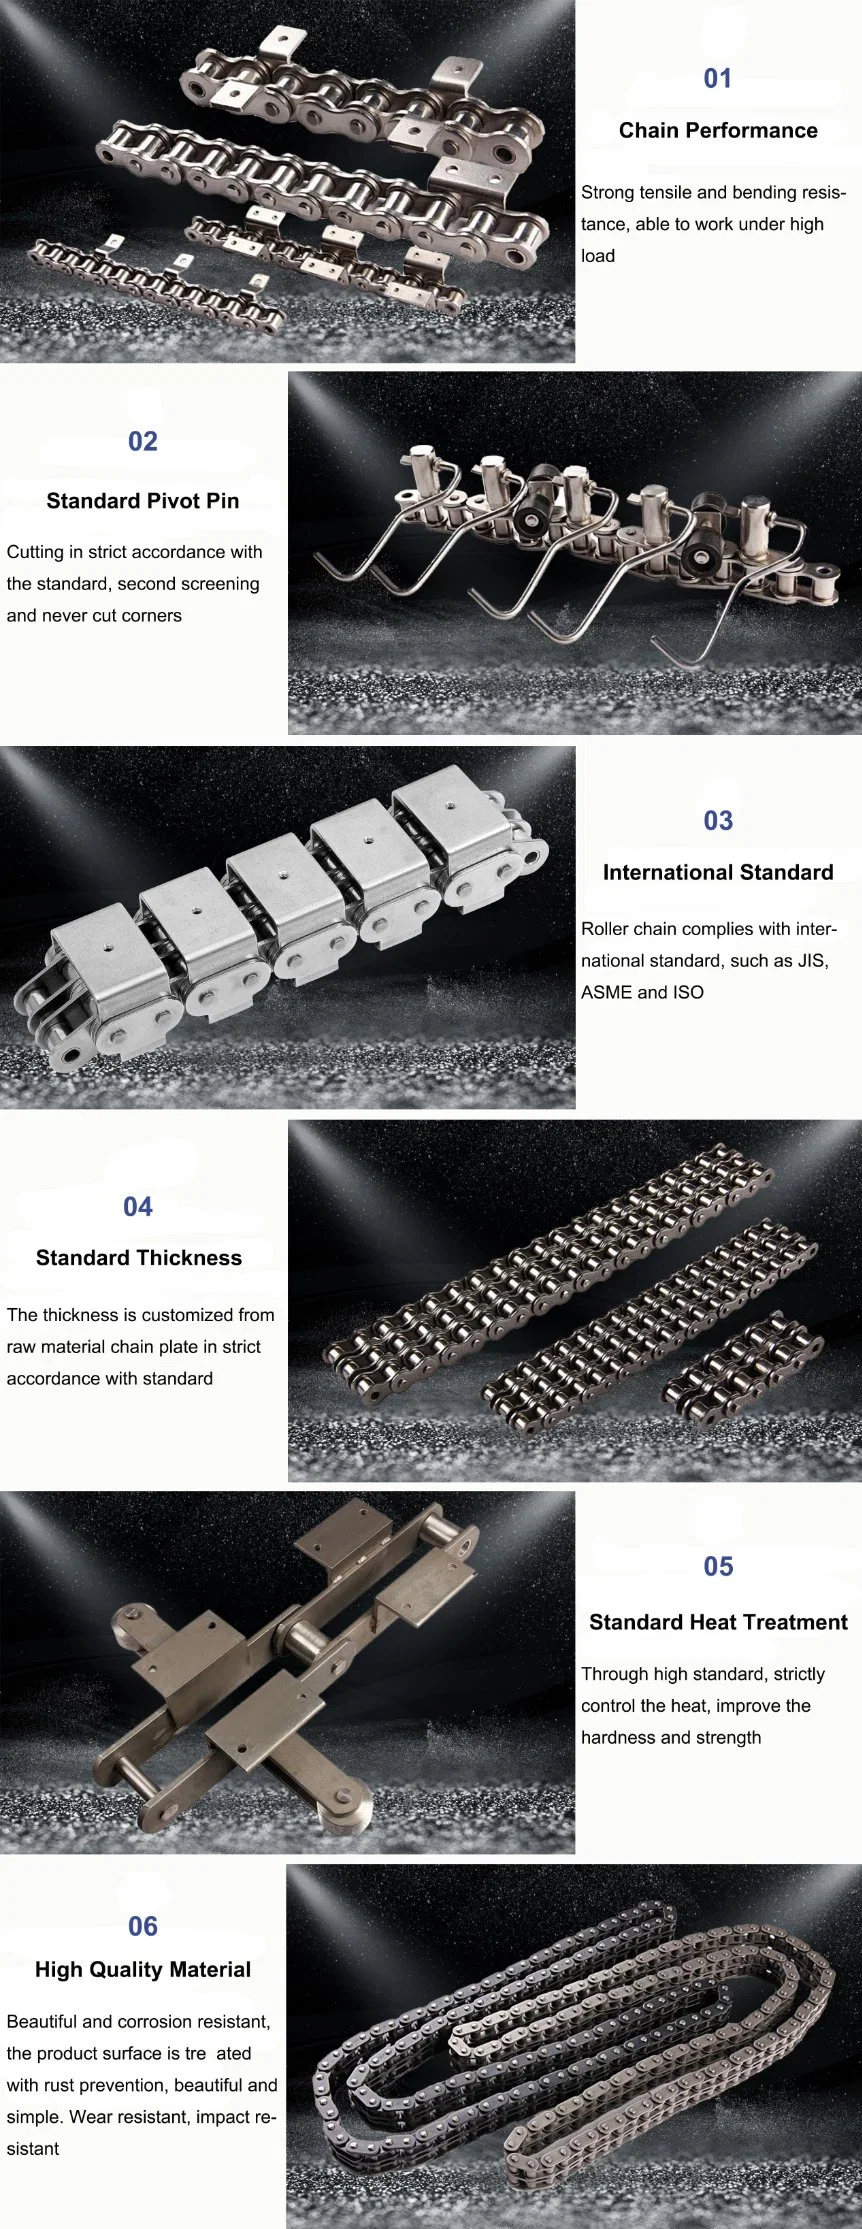 Competitive Stainless Steel Conveyor Chain Flat Top Conveyor Chain China Manufacturer